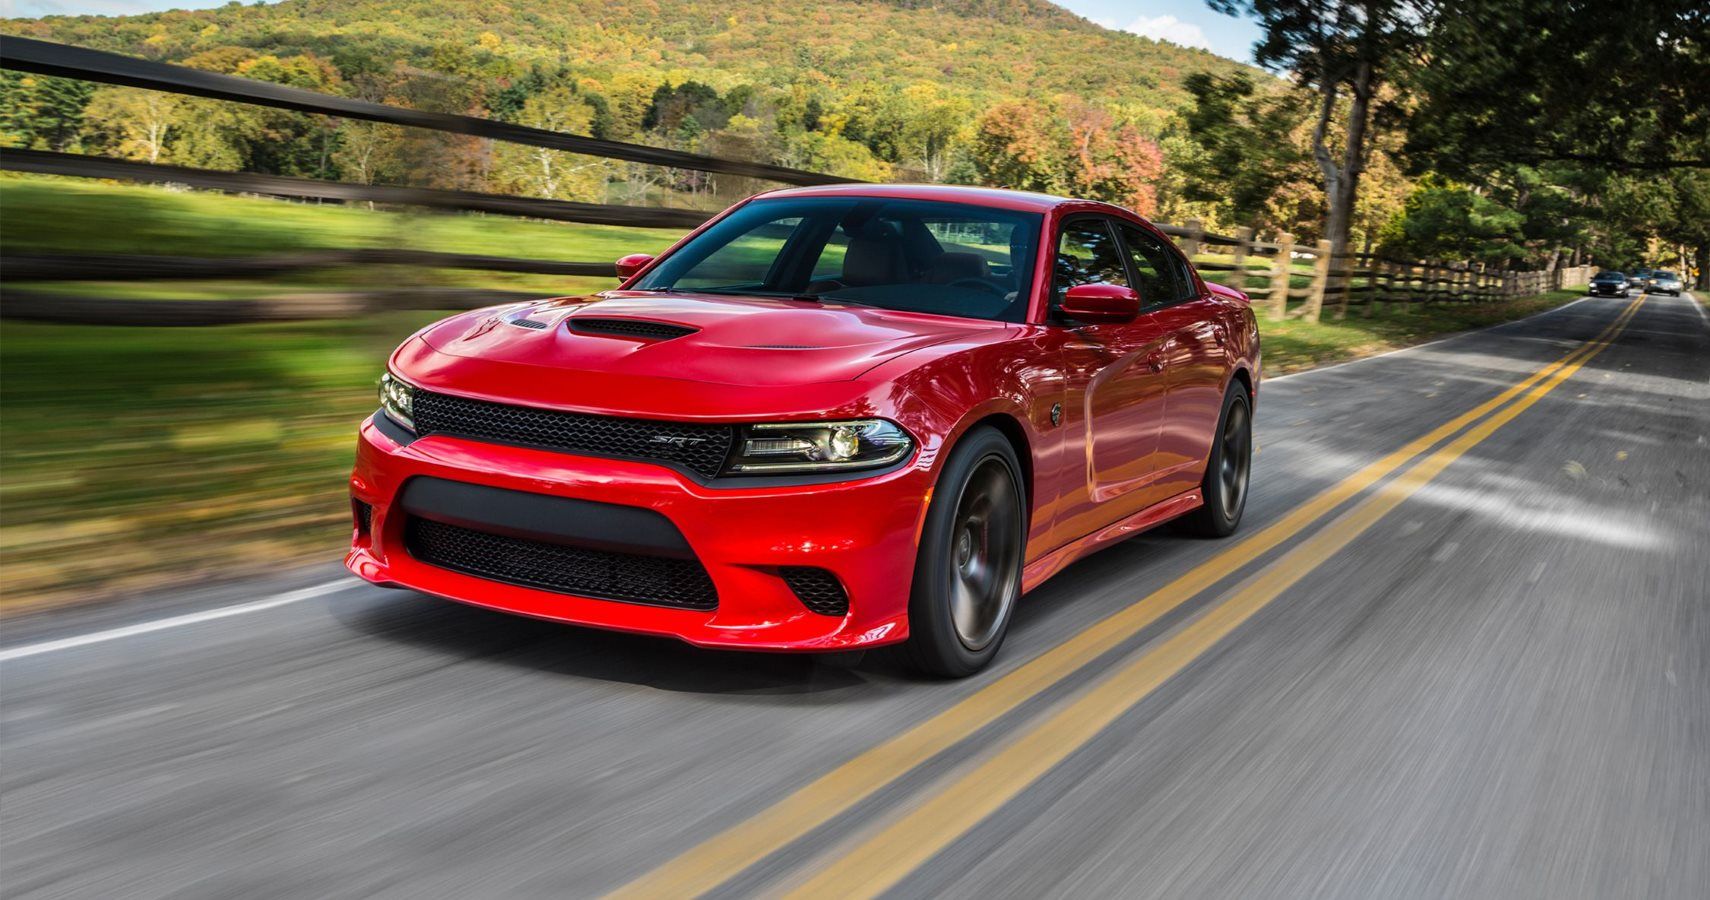 Watch A Dodge Charger Hellcat Tackle The Nürburgring From The Best Seat